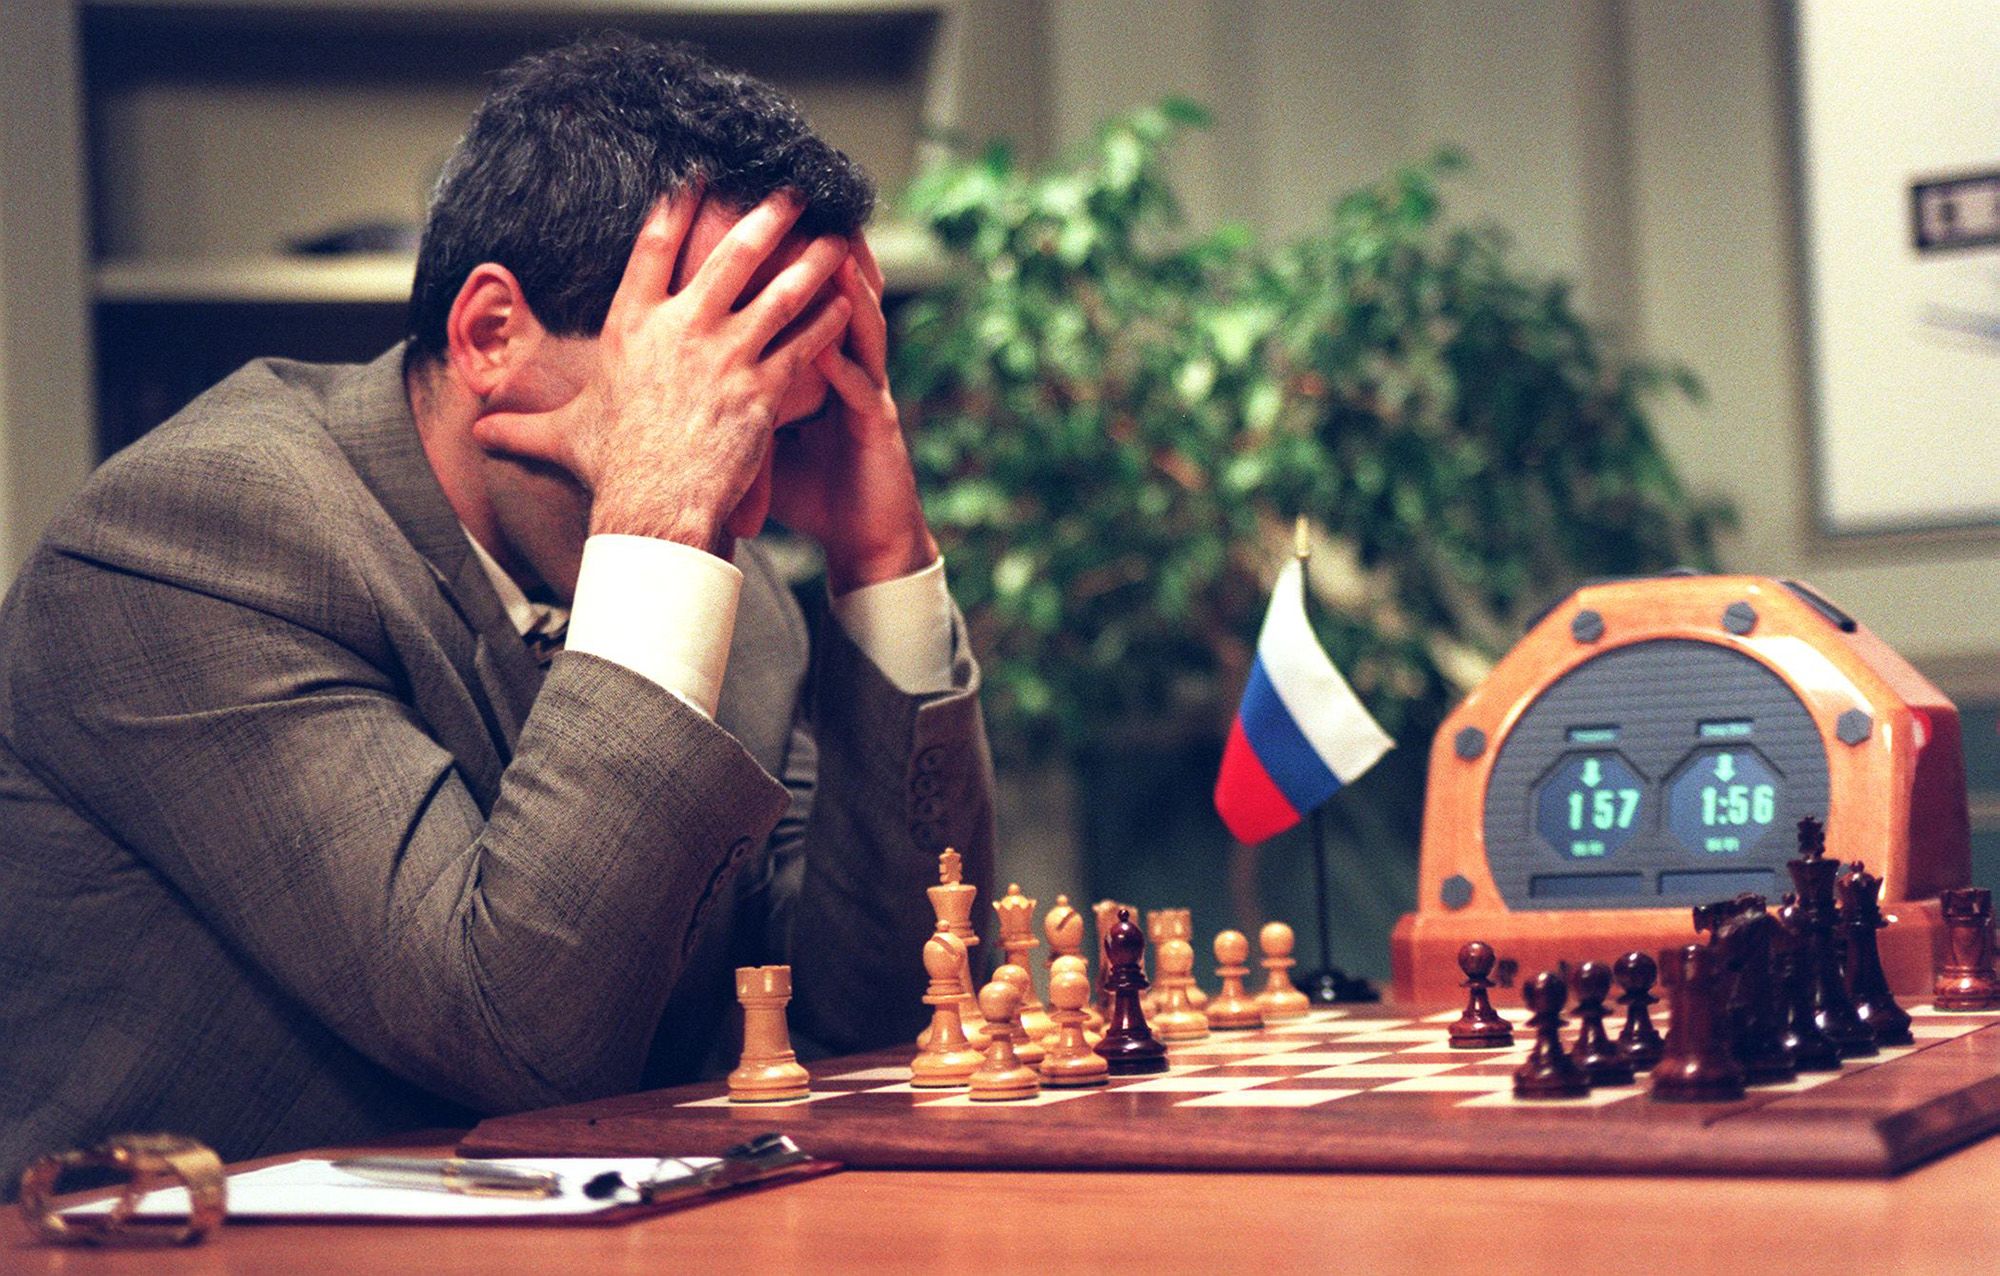 Karpov caught out: Chess great loses in uncharacteristic fashion